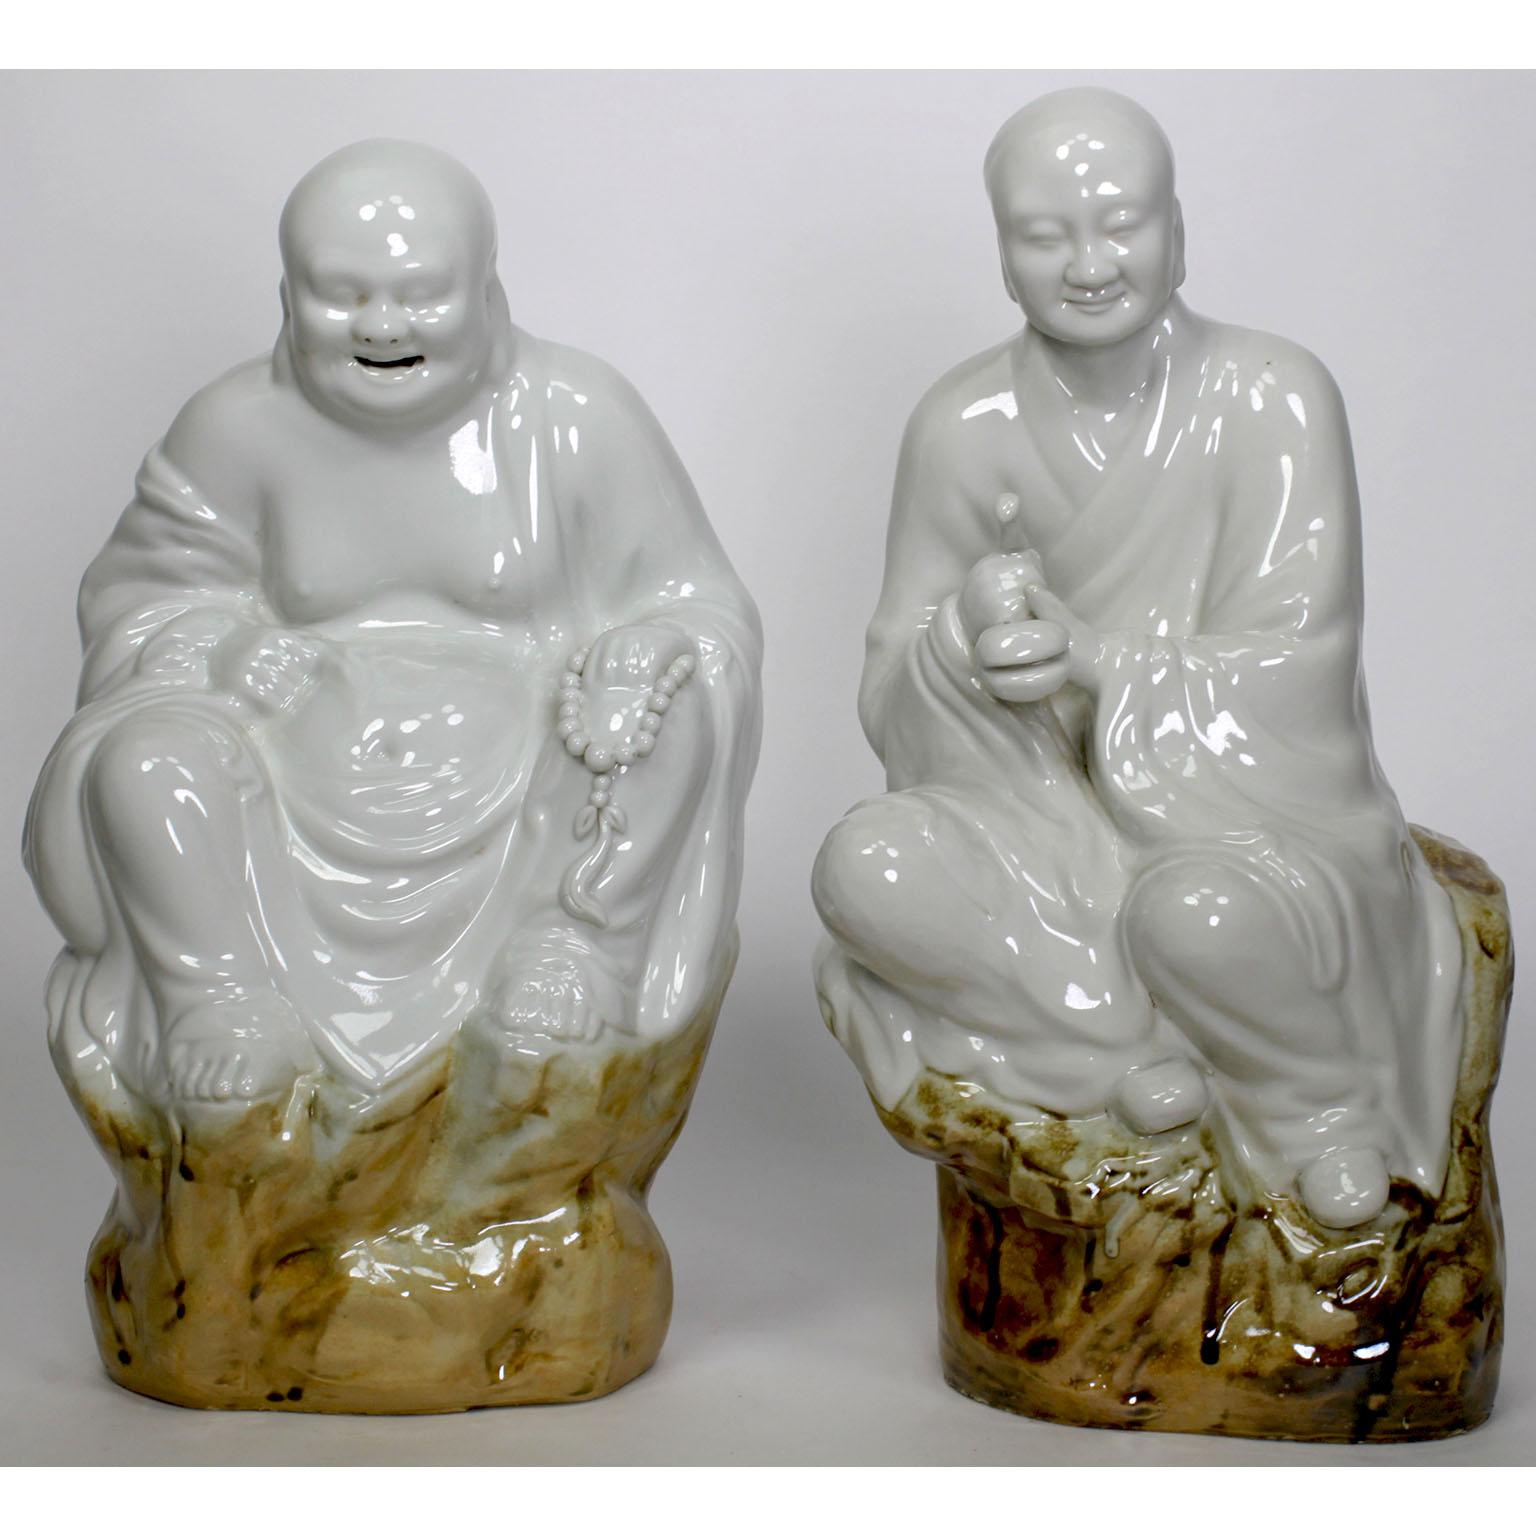 Chinese Set of Eighteen Blanc de Chine Enameled Ceramic Arhats or Luohan Buddhas For Sale 2